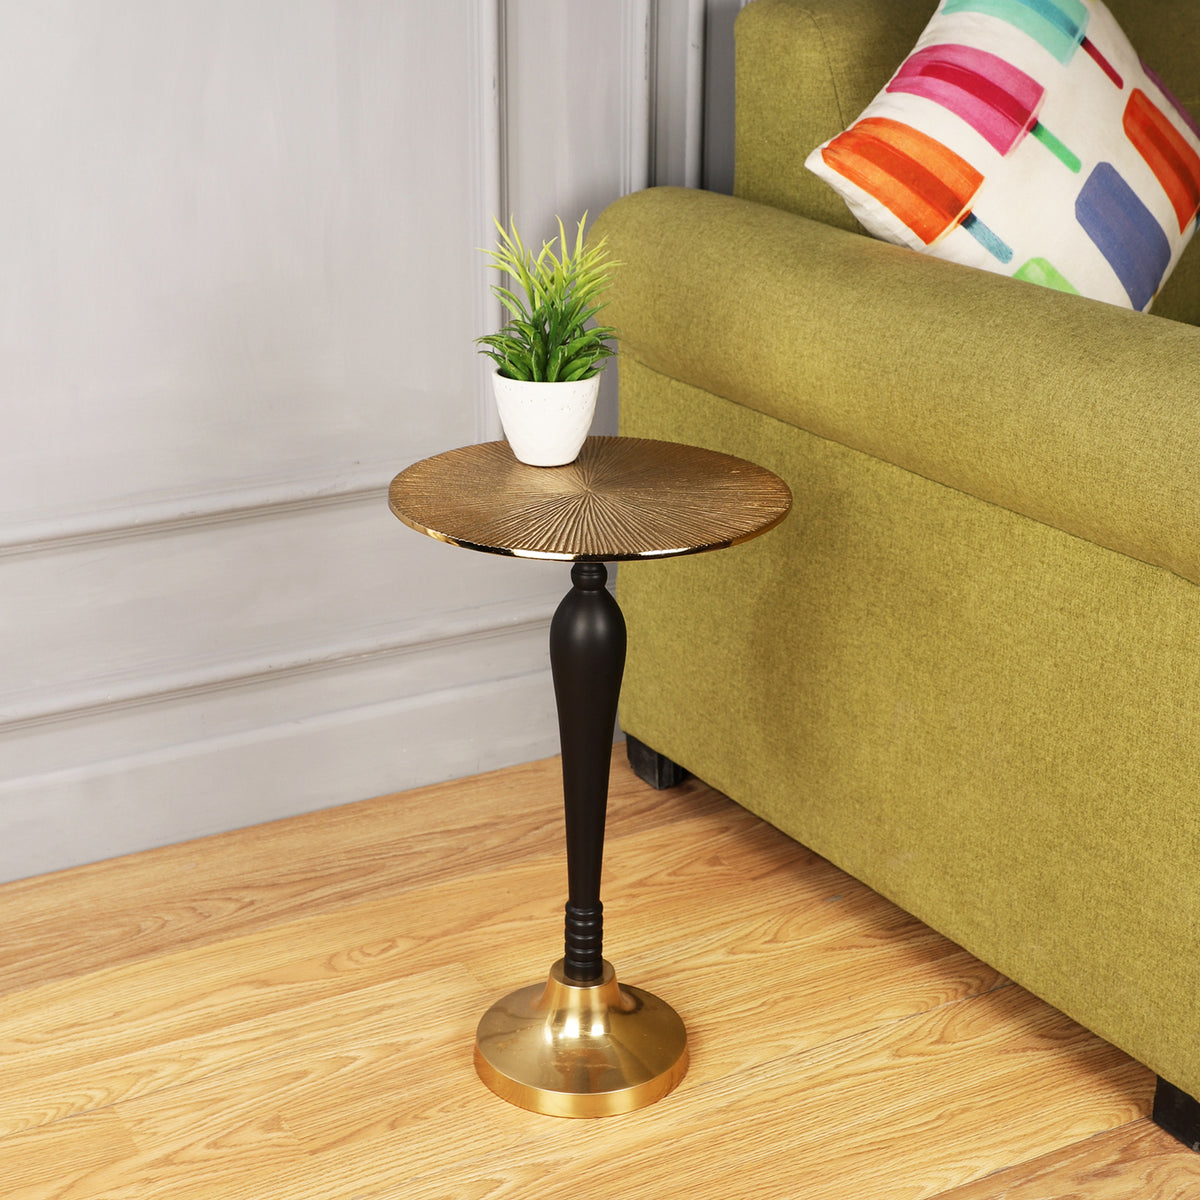 The Archie side Table